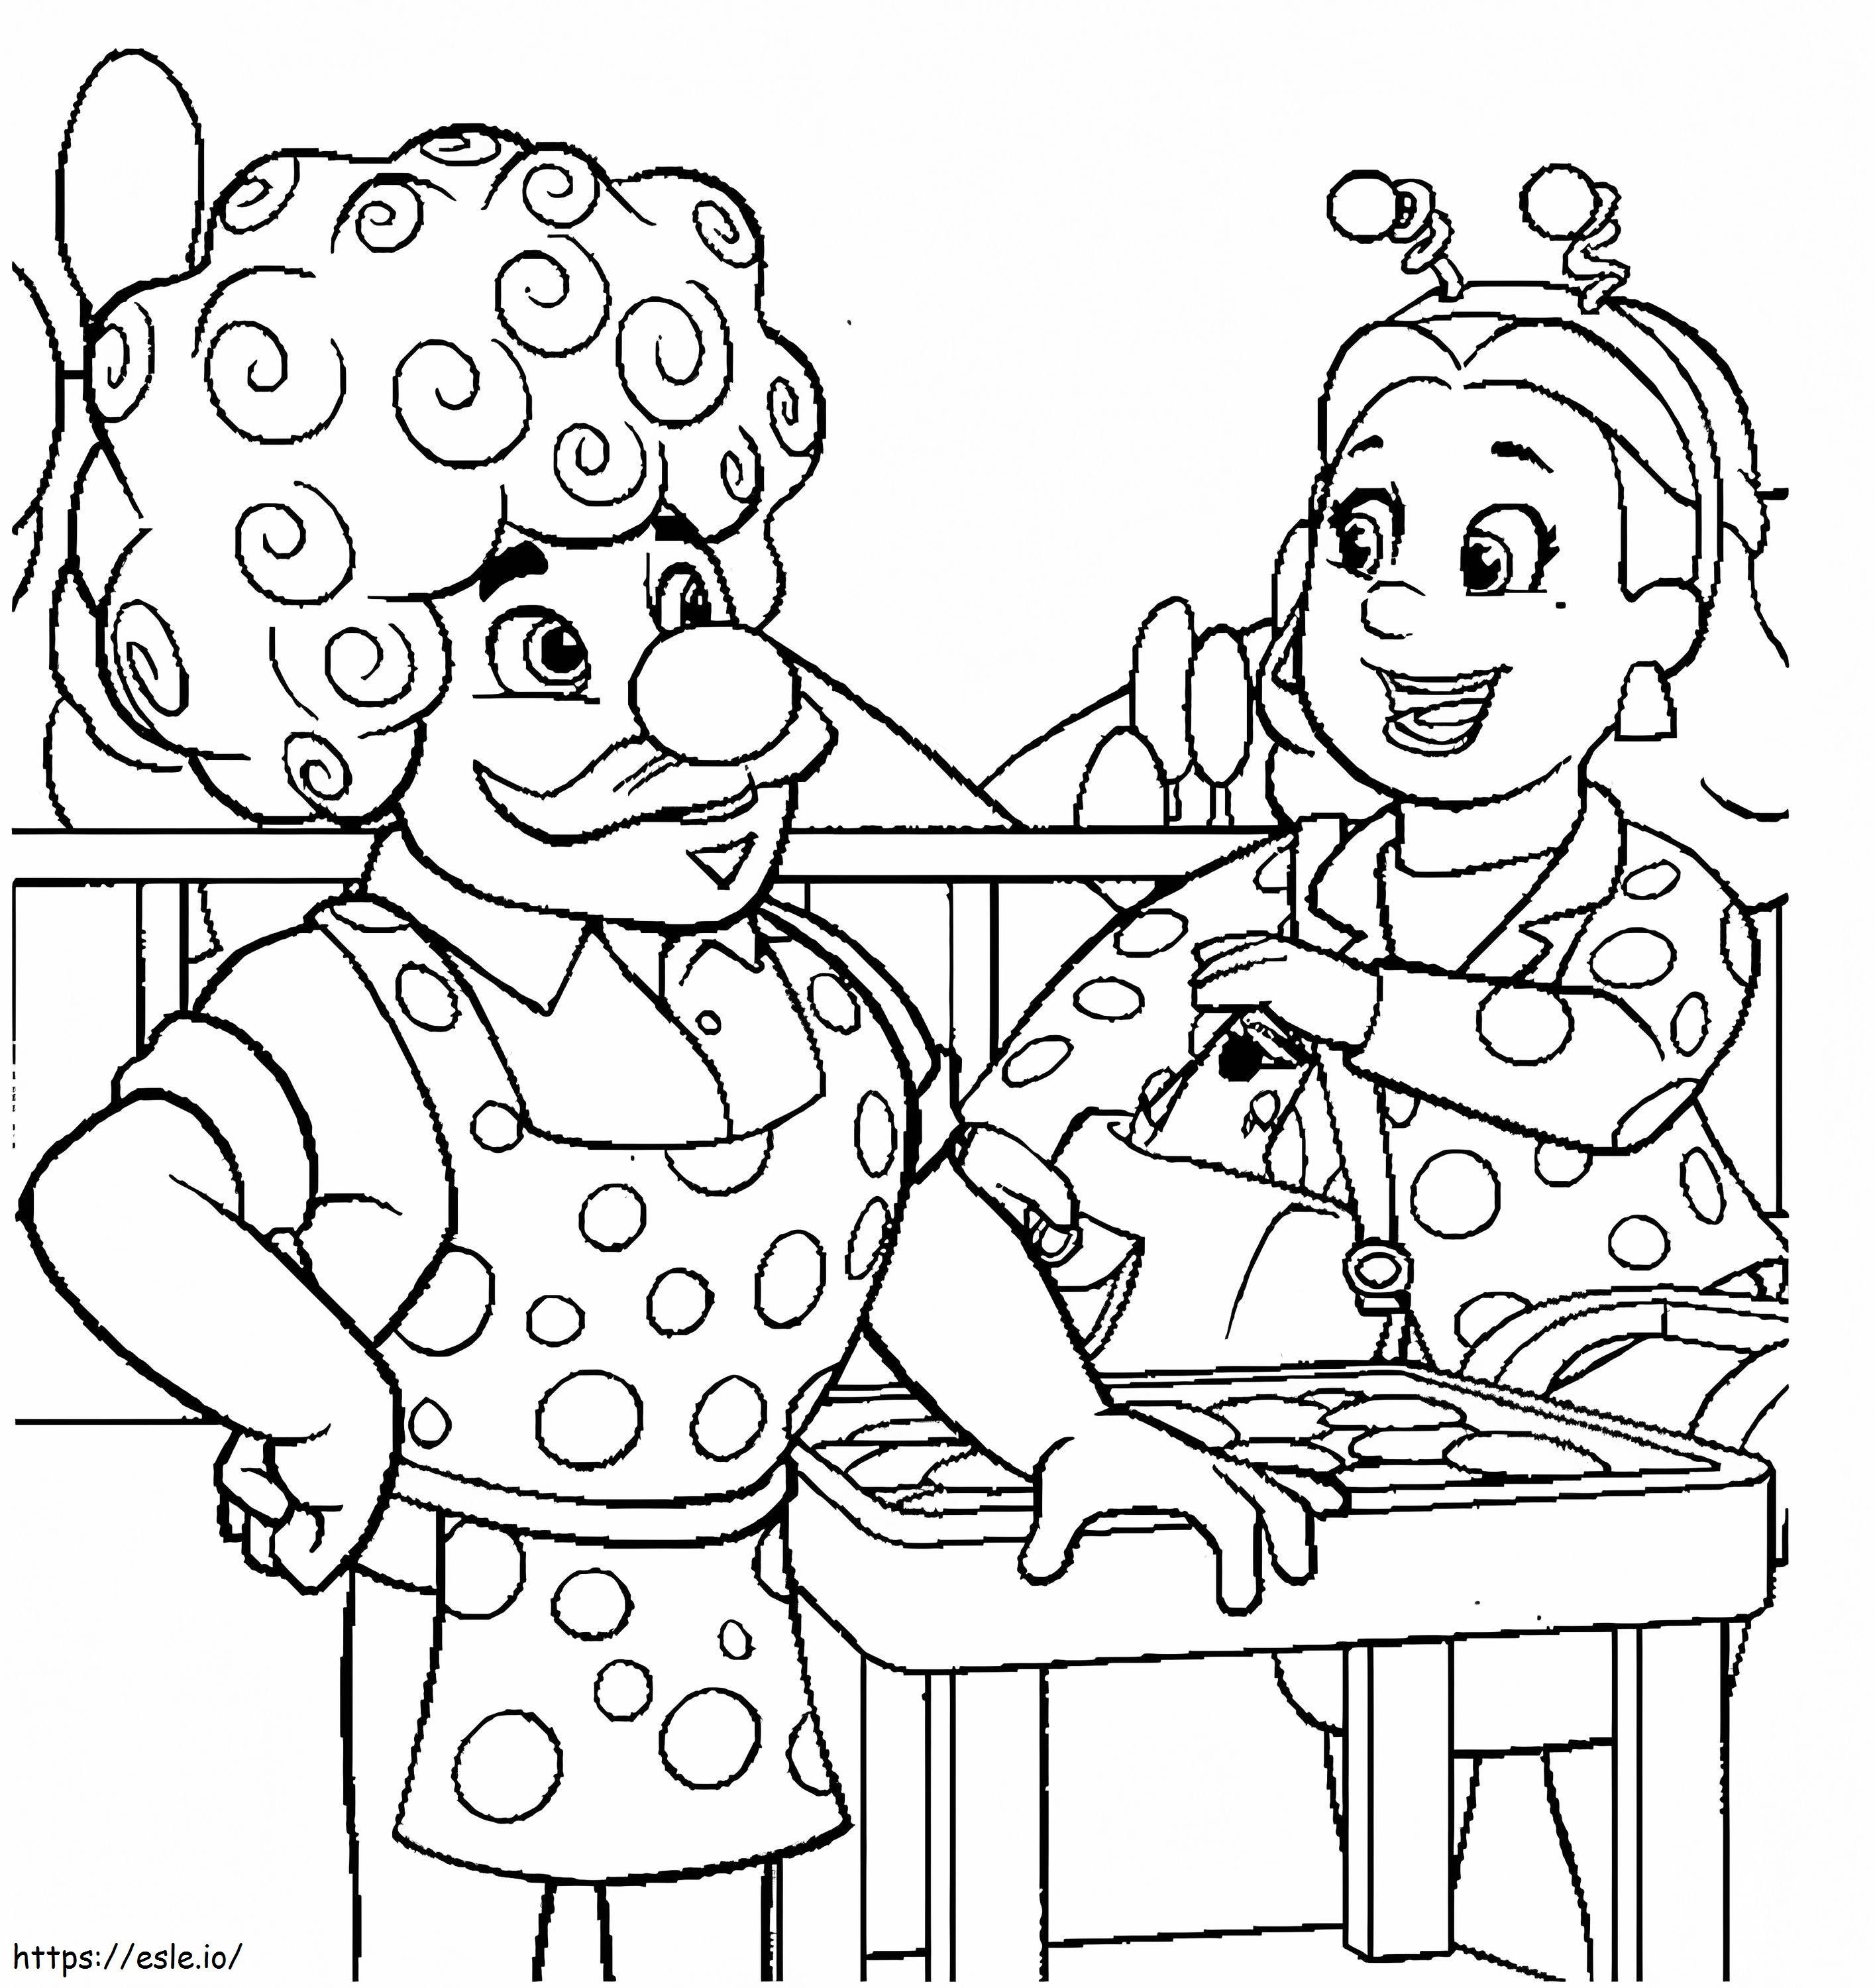 Mr. Porter And Mayor Goodway coloring page